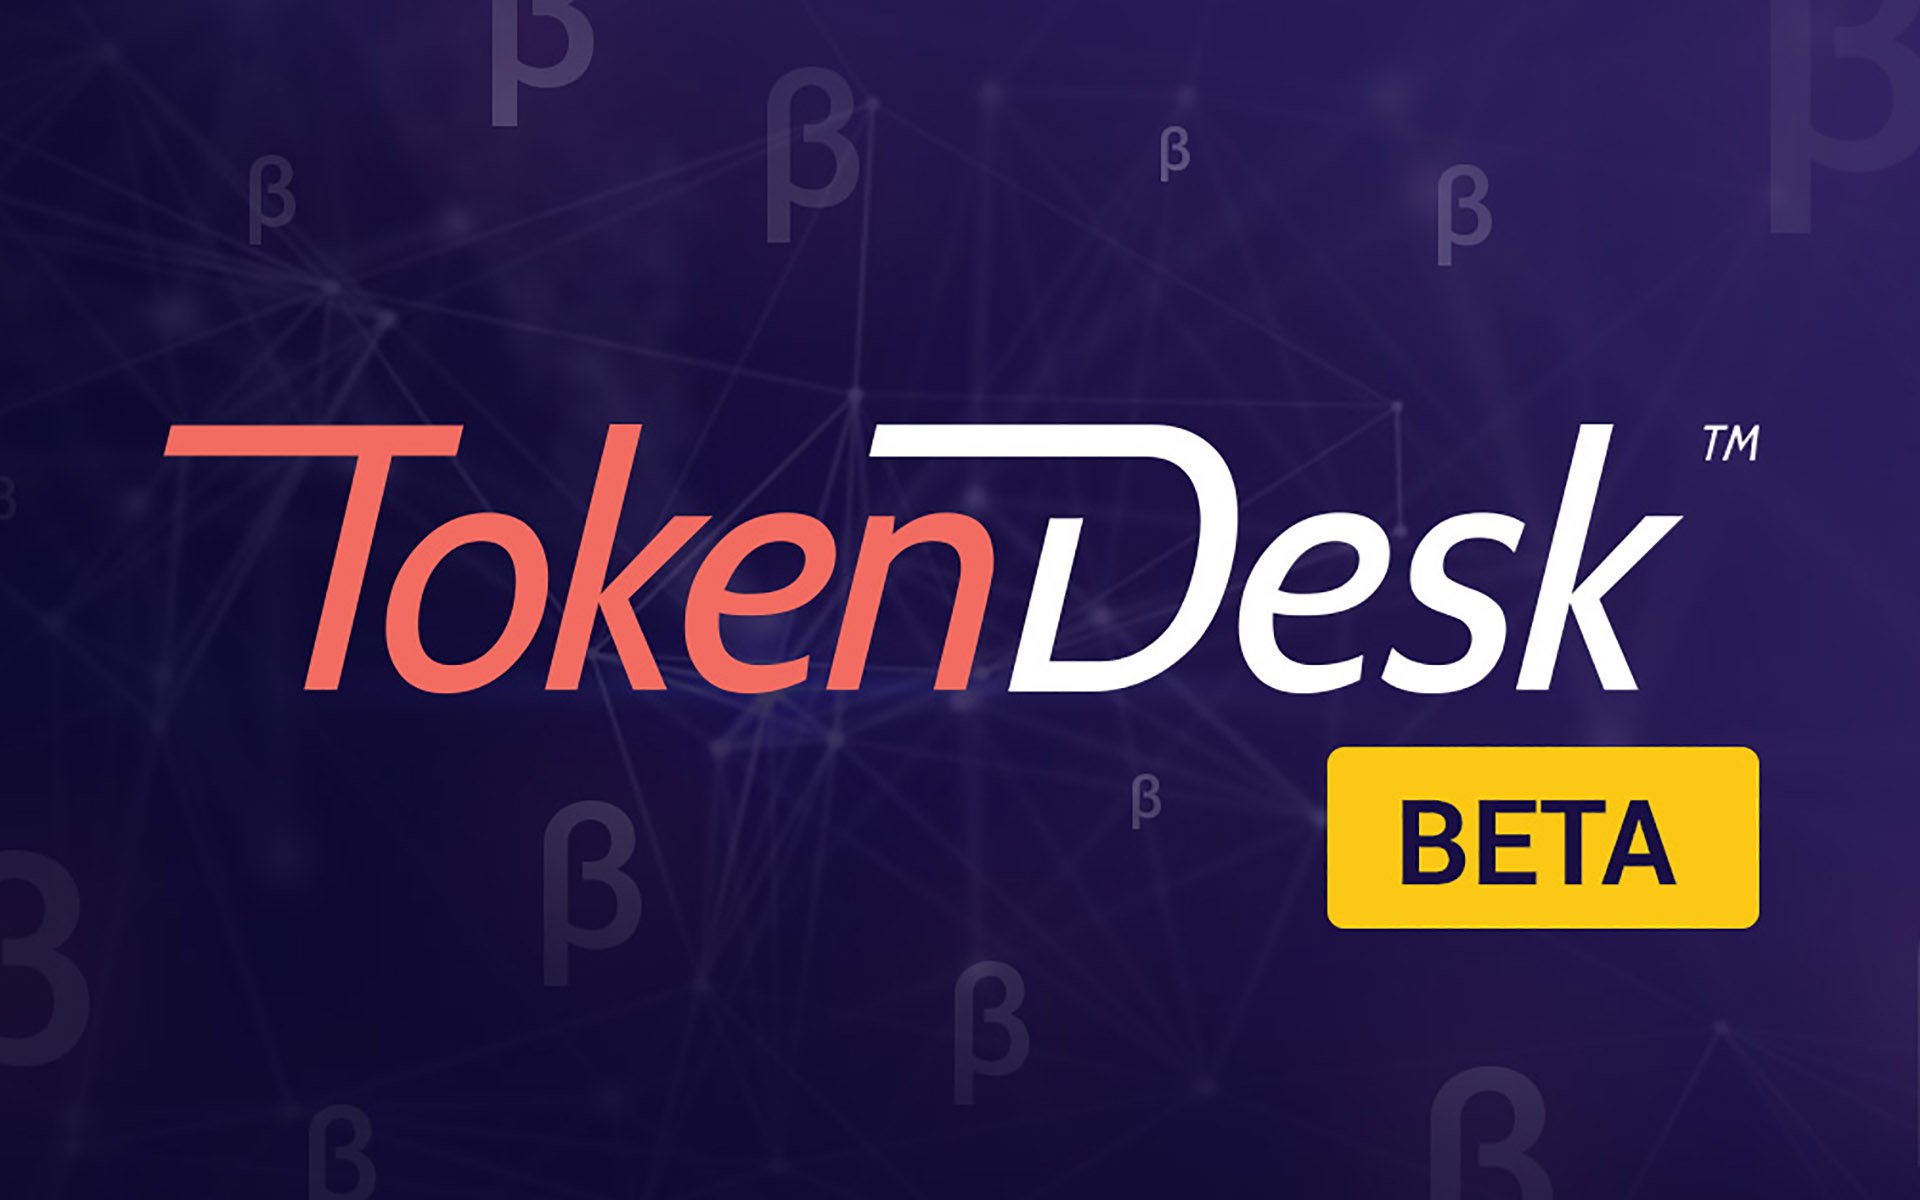 TokenDesk Beta Is Out: ICO Refunds Are Now Possible!